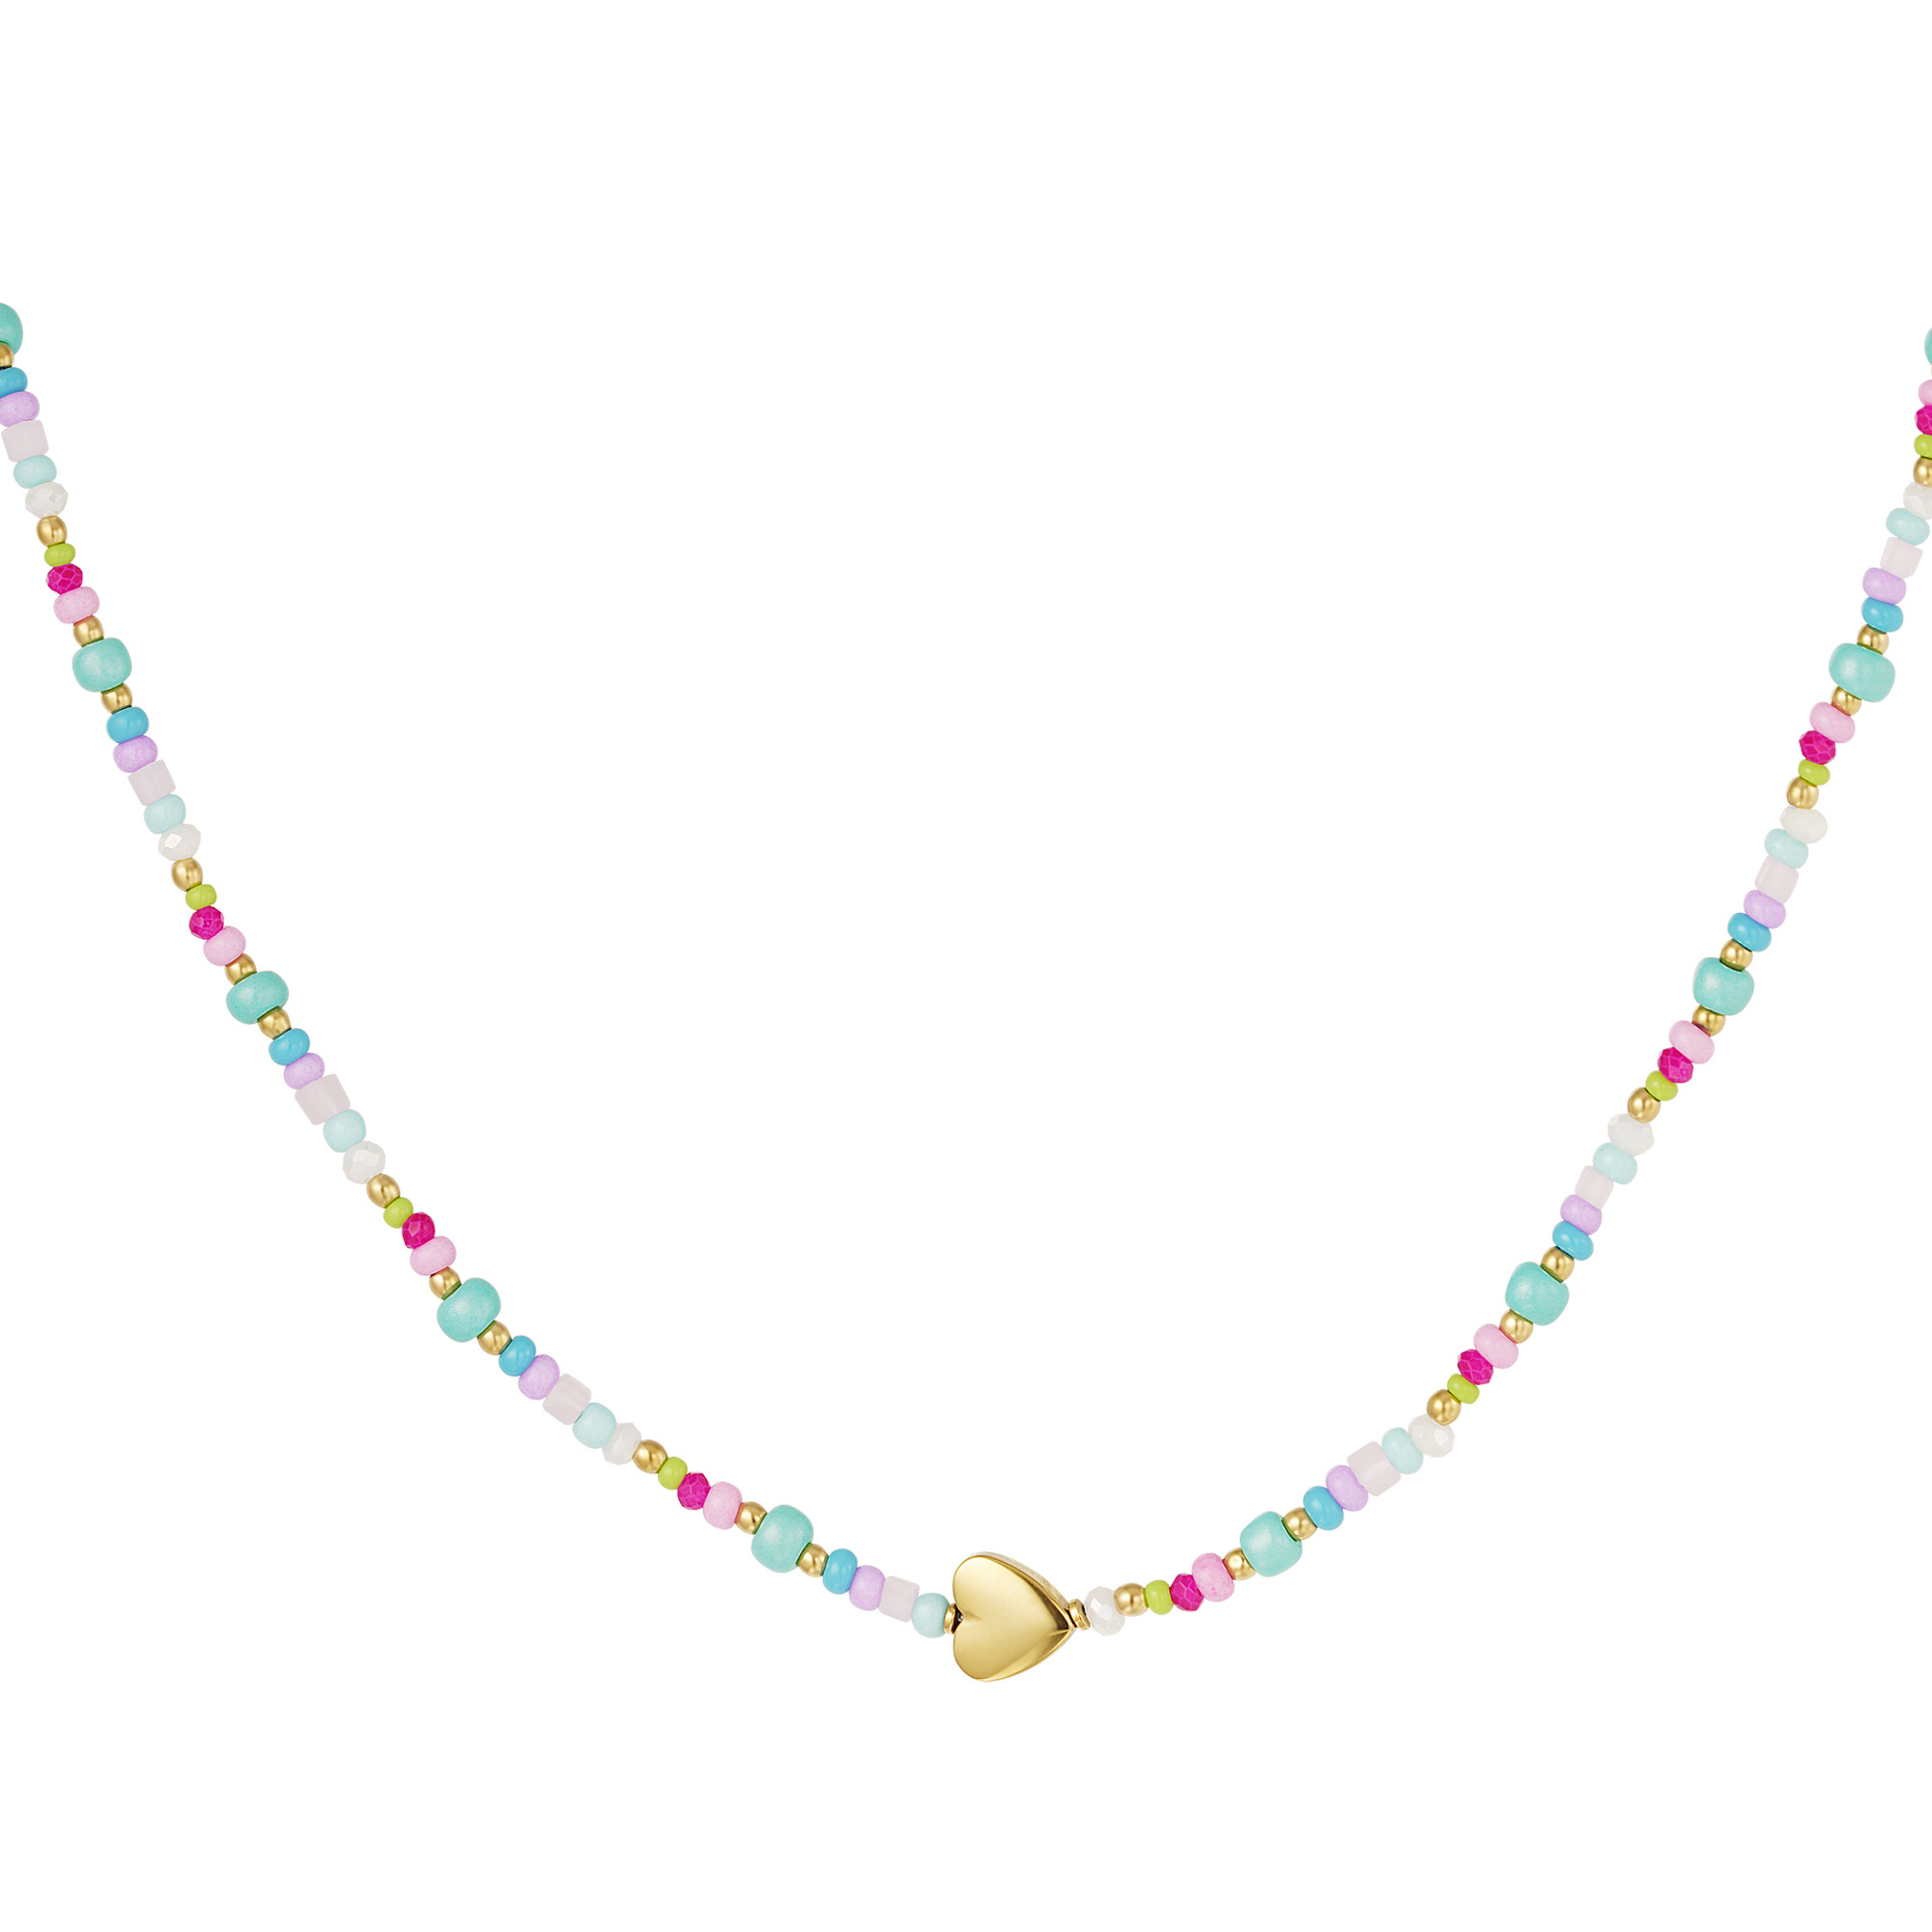 Blue heart necklace - #summergirls collection